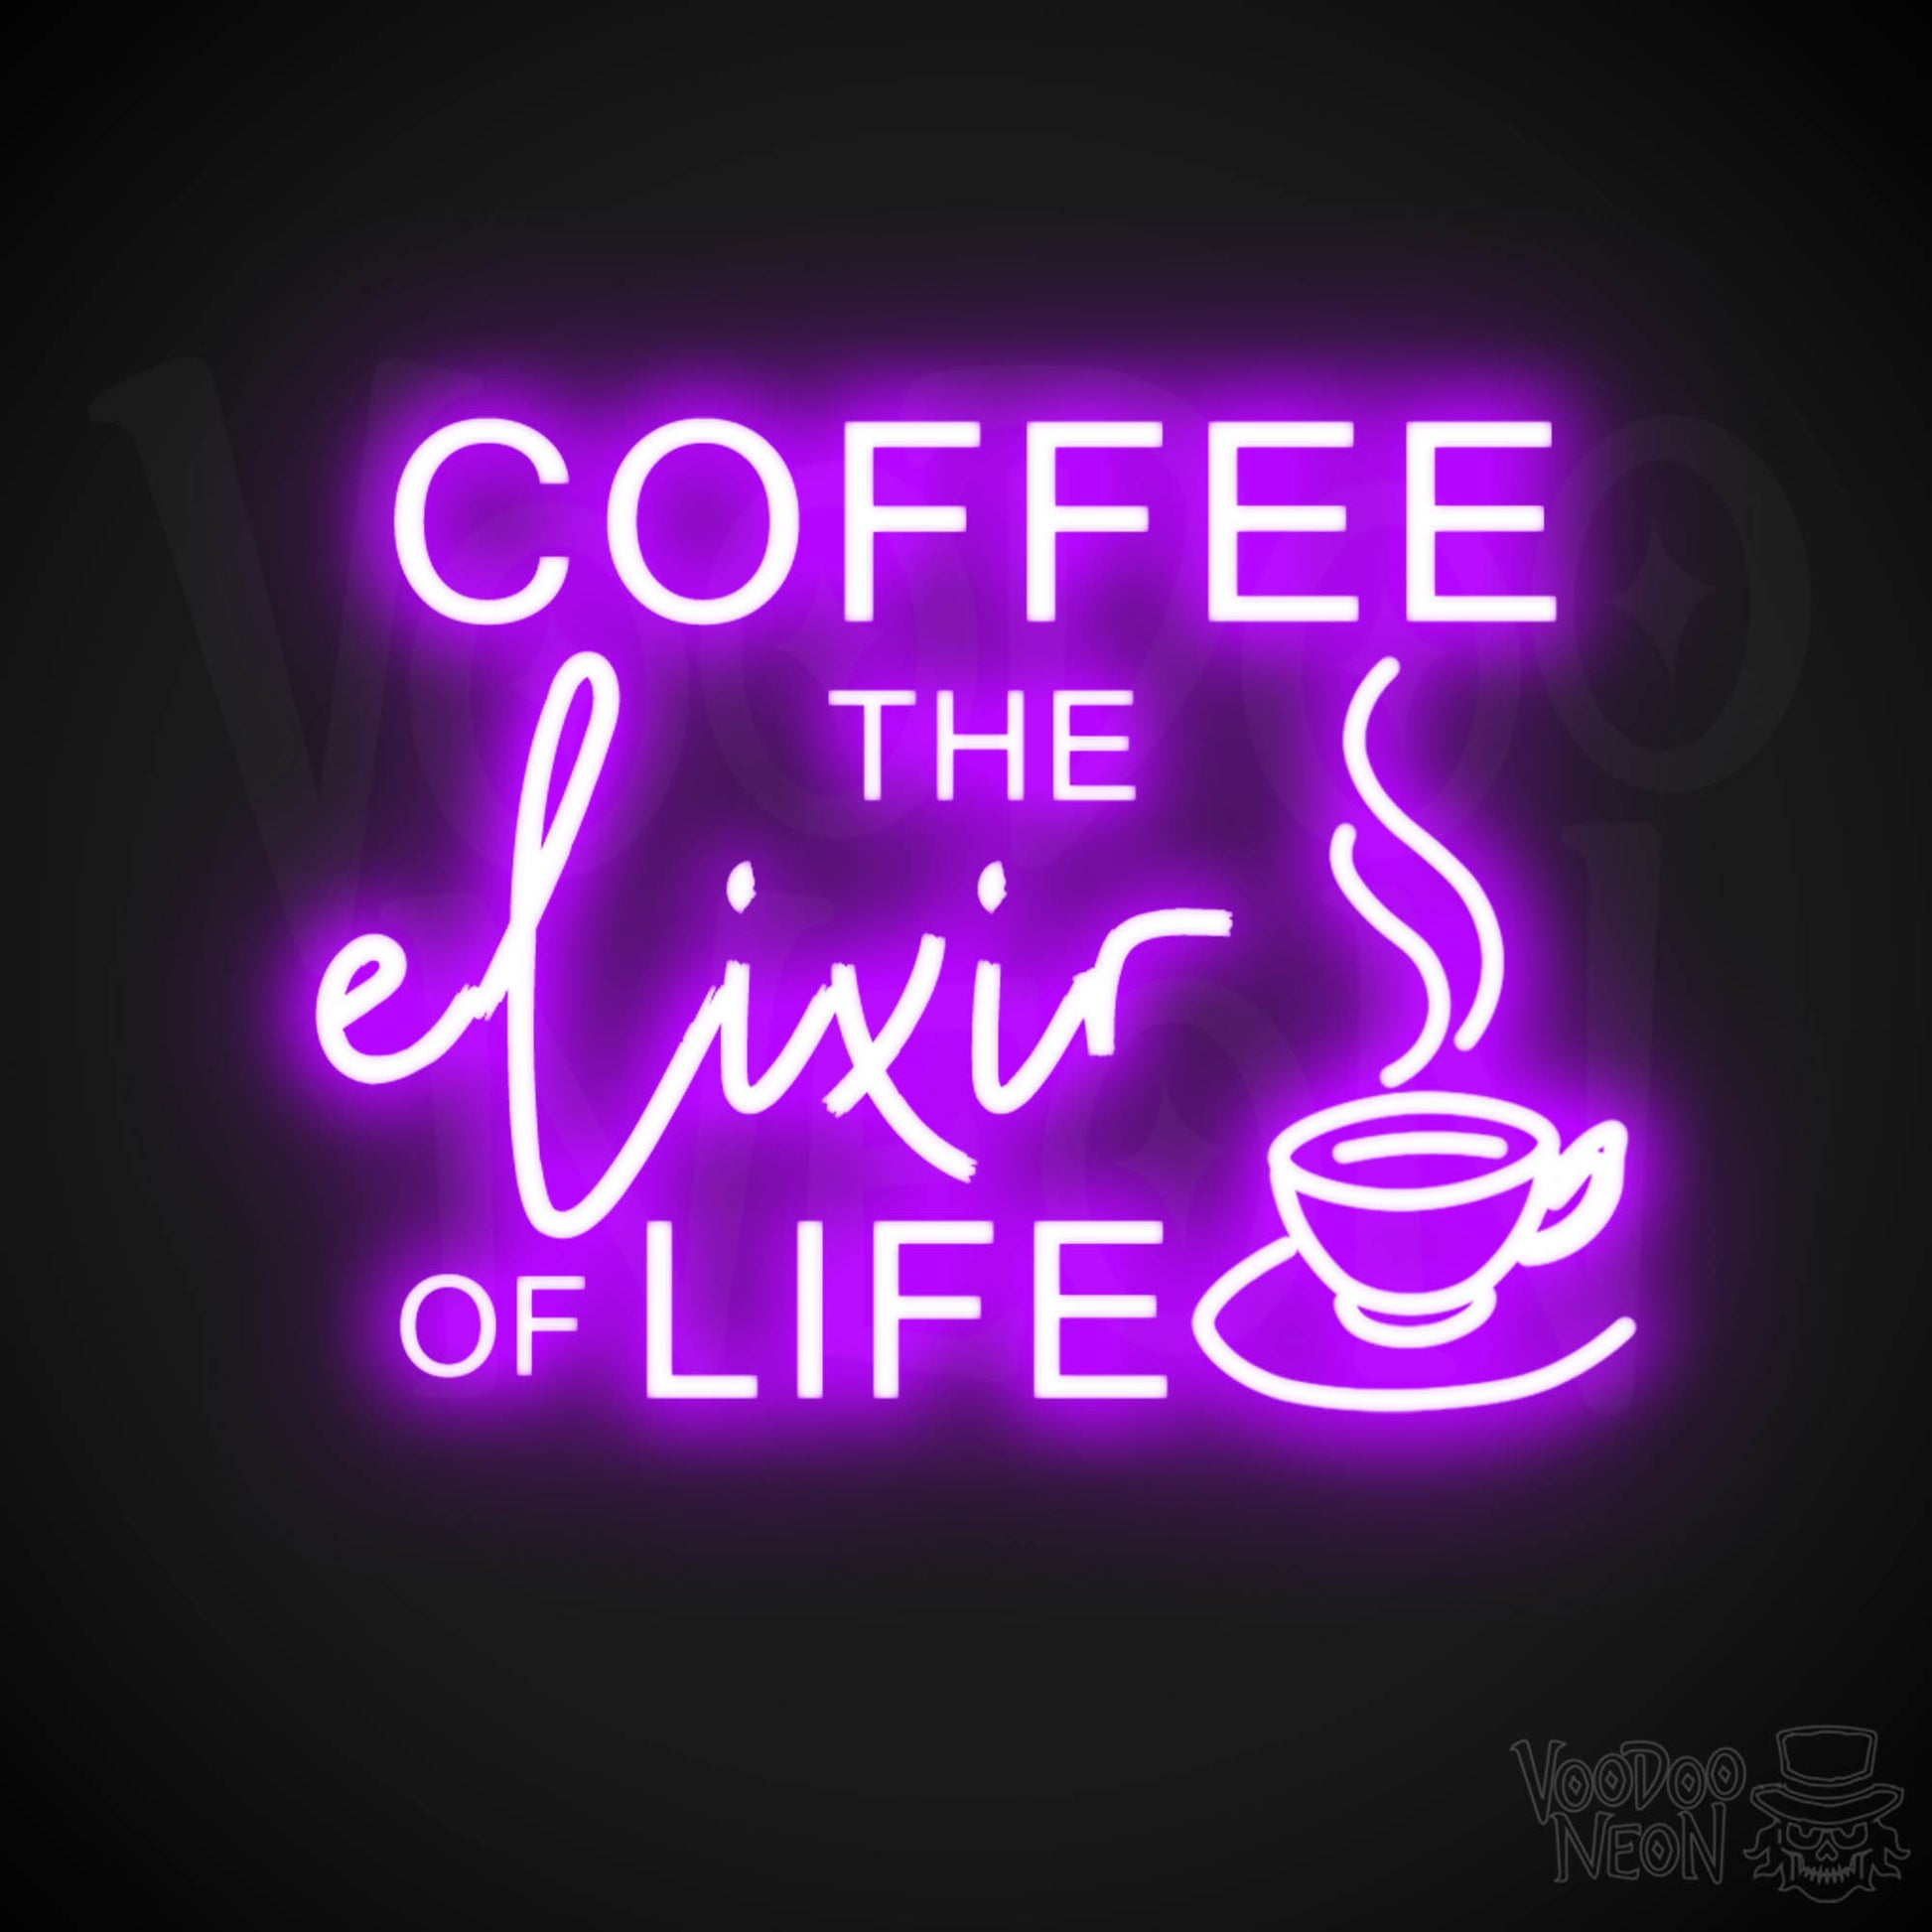 Coffee - The Elixir Of Life Neon Sign - The Elixir Of Life Sign - Color Purple